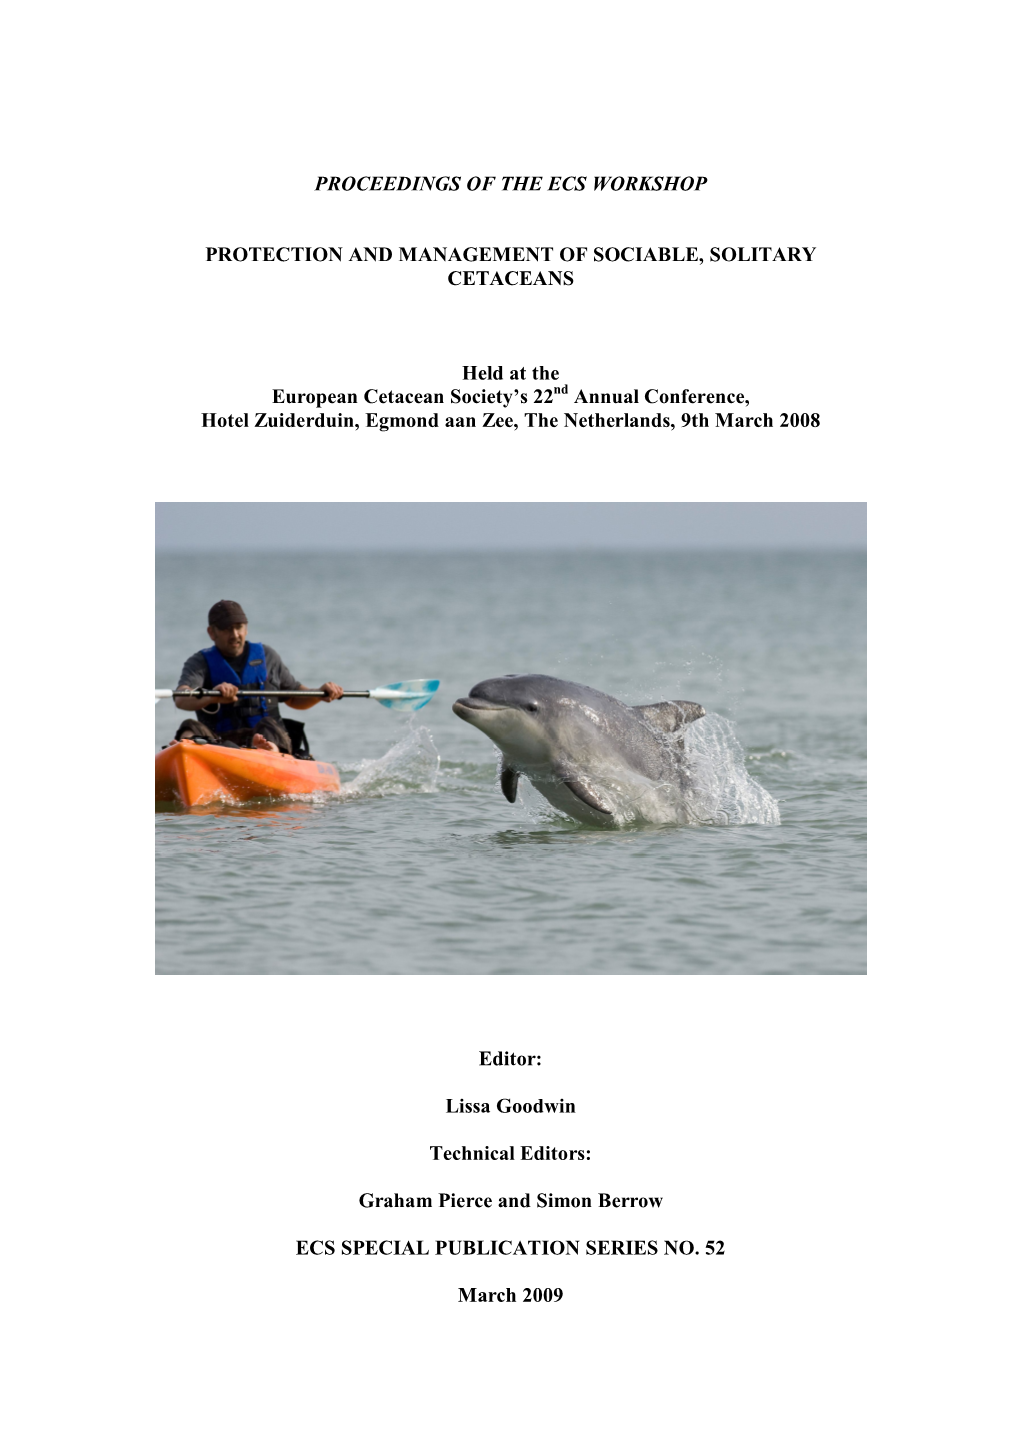 PROCEEDINGS of the ECS WORKSHOP PROTECTION and MANAGEMENT of SOCIABLE, SOLITARY CETACEANS Held at the European Cetacean Society